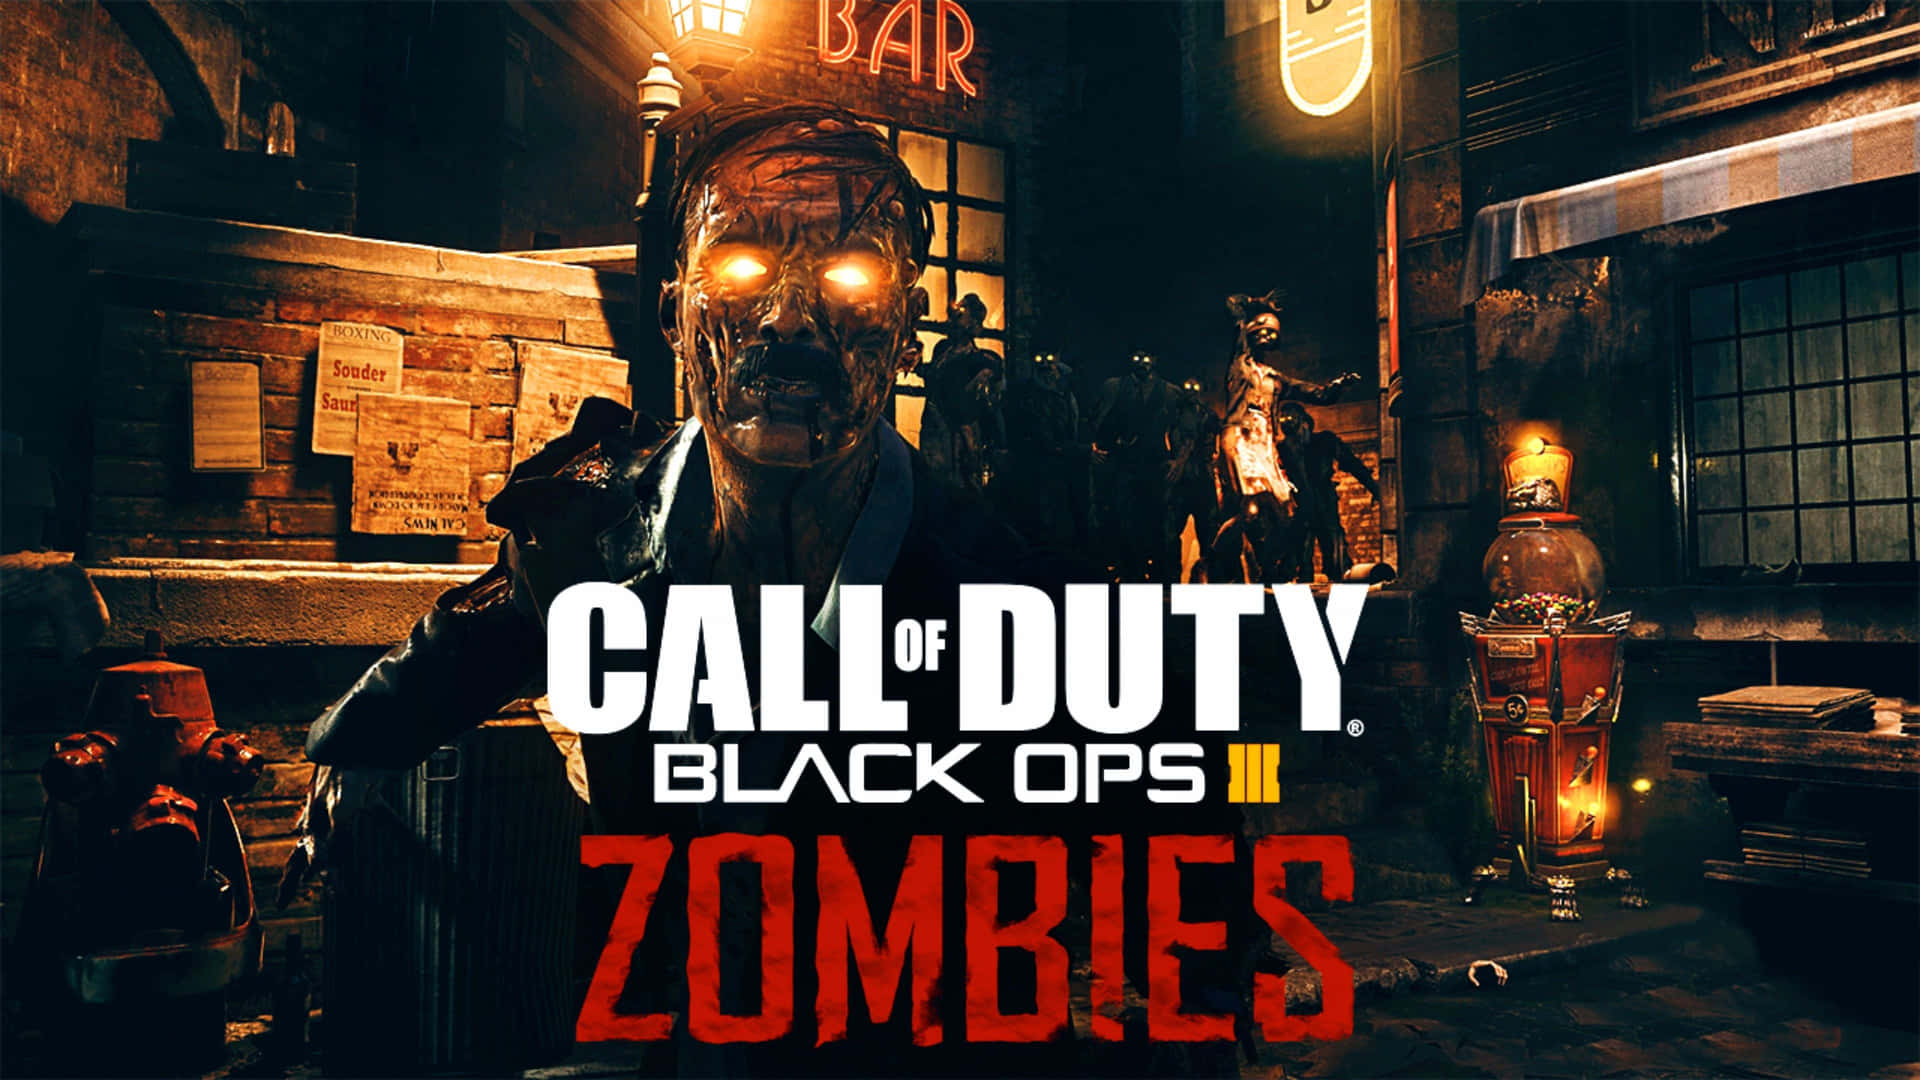 cod black ops wallpaper 1080p. call of duty black ops zombies